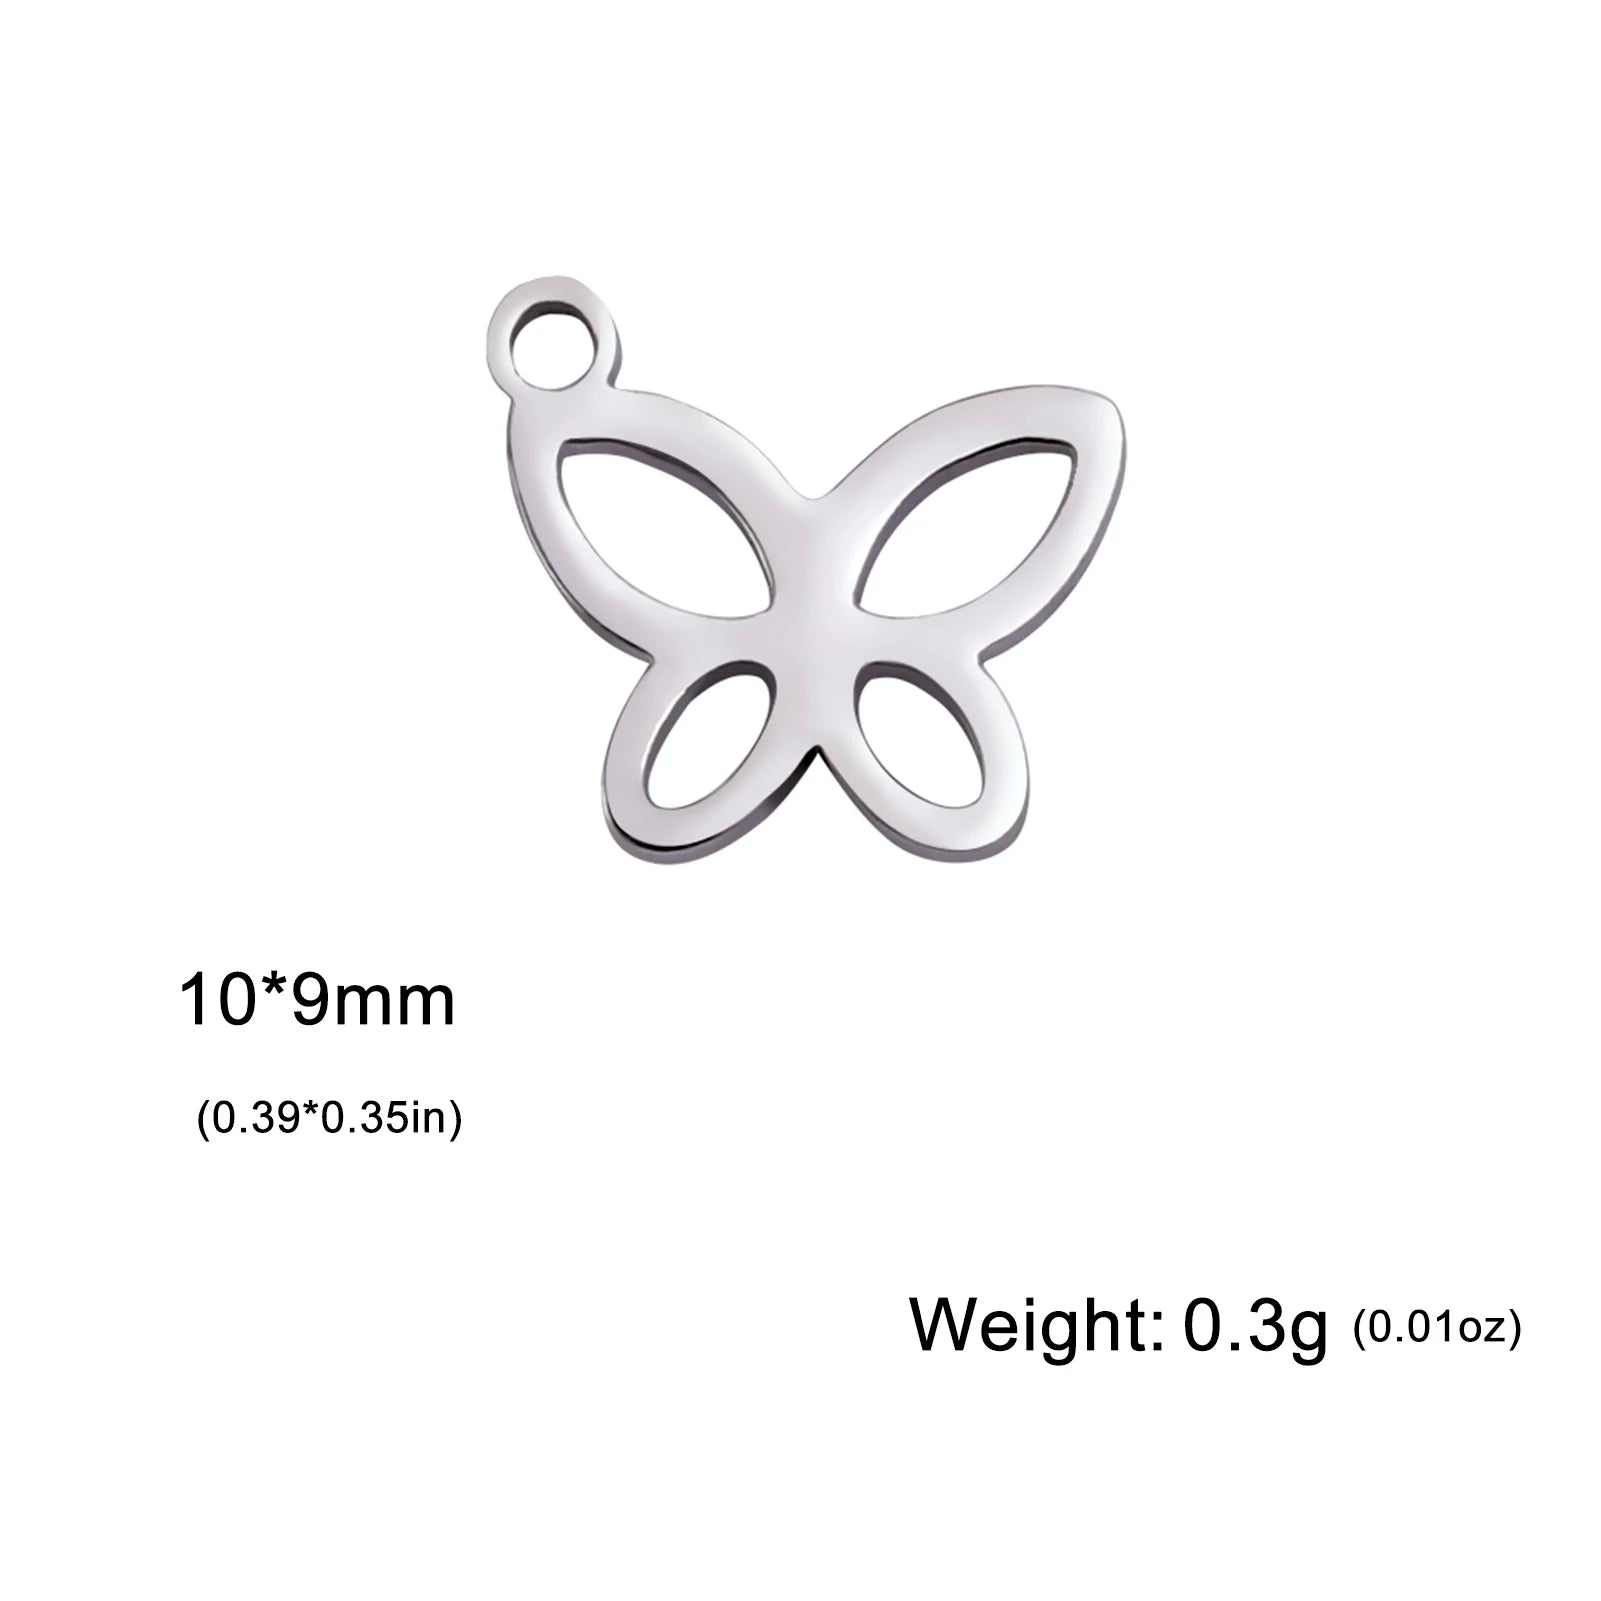 5PCS Butterfly Pendant Charm Earrings Necklace Stainless Steel Women'sSPECIFICATIONSBrand Name: NoneOrigin: Mainland ChinaMetals Type: Stainless SteelCharms Type: AnimalsFine or Fashion: FashionModel Number: Butterfly Pendant CharmMateJewelry CirclesJewelry Circles5PCS Butterfly Pendant Charm Earrings Necklace Stainless Steel Women'